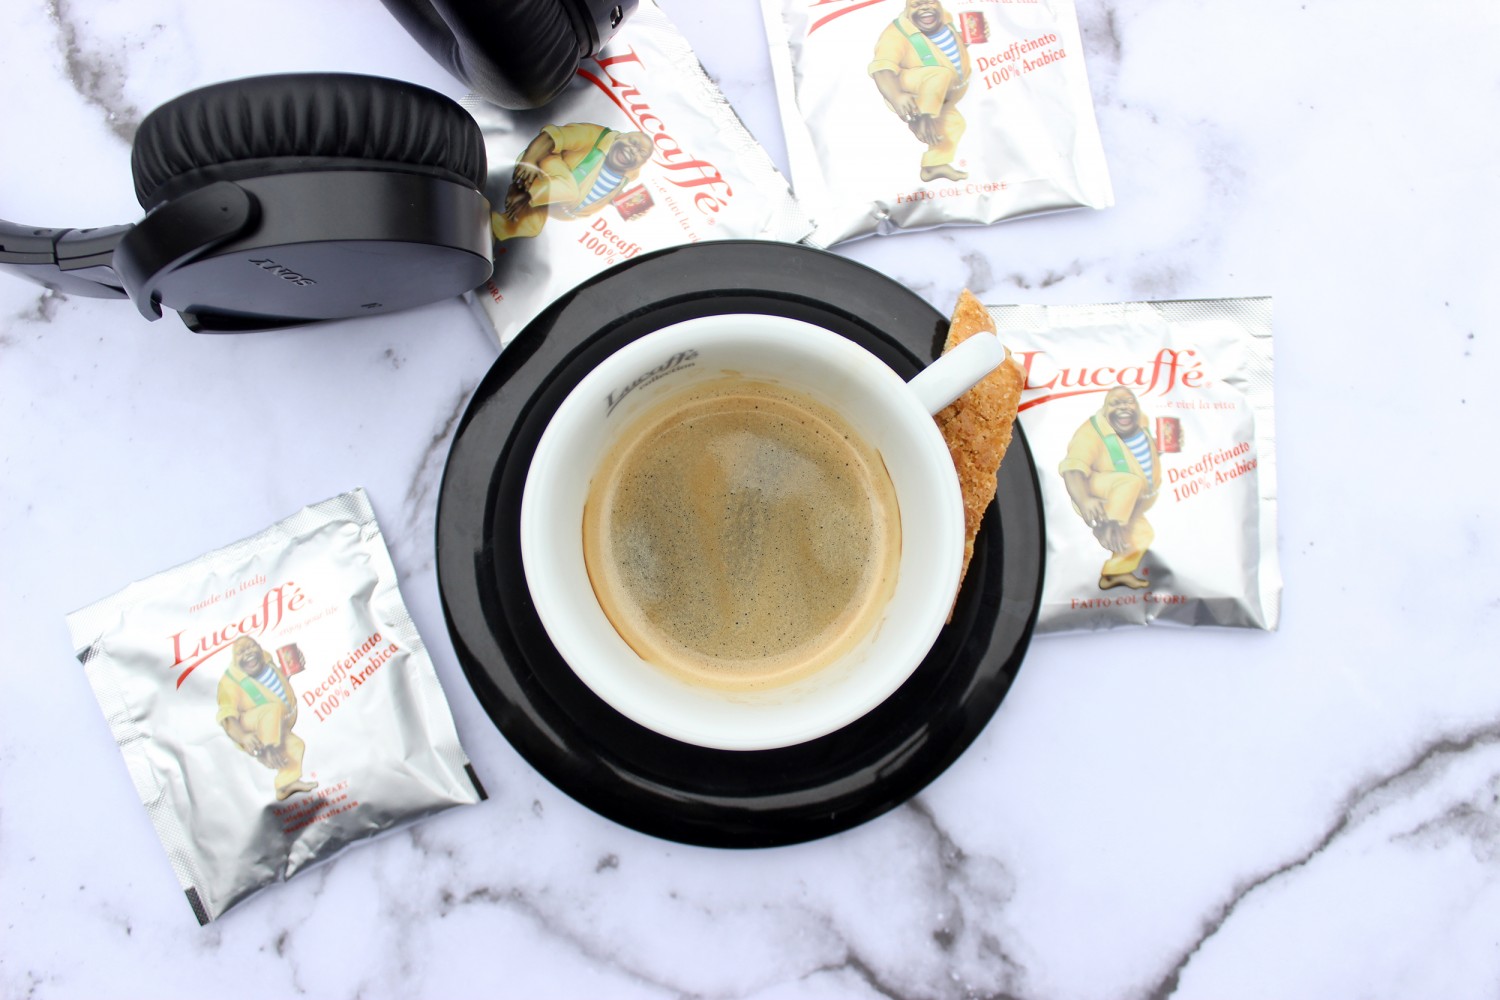 lucaffe-letters-to-a